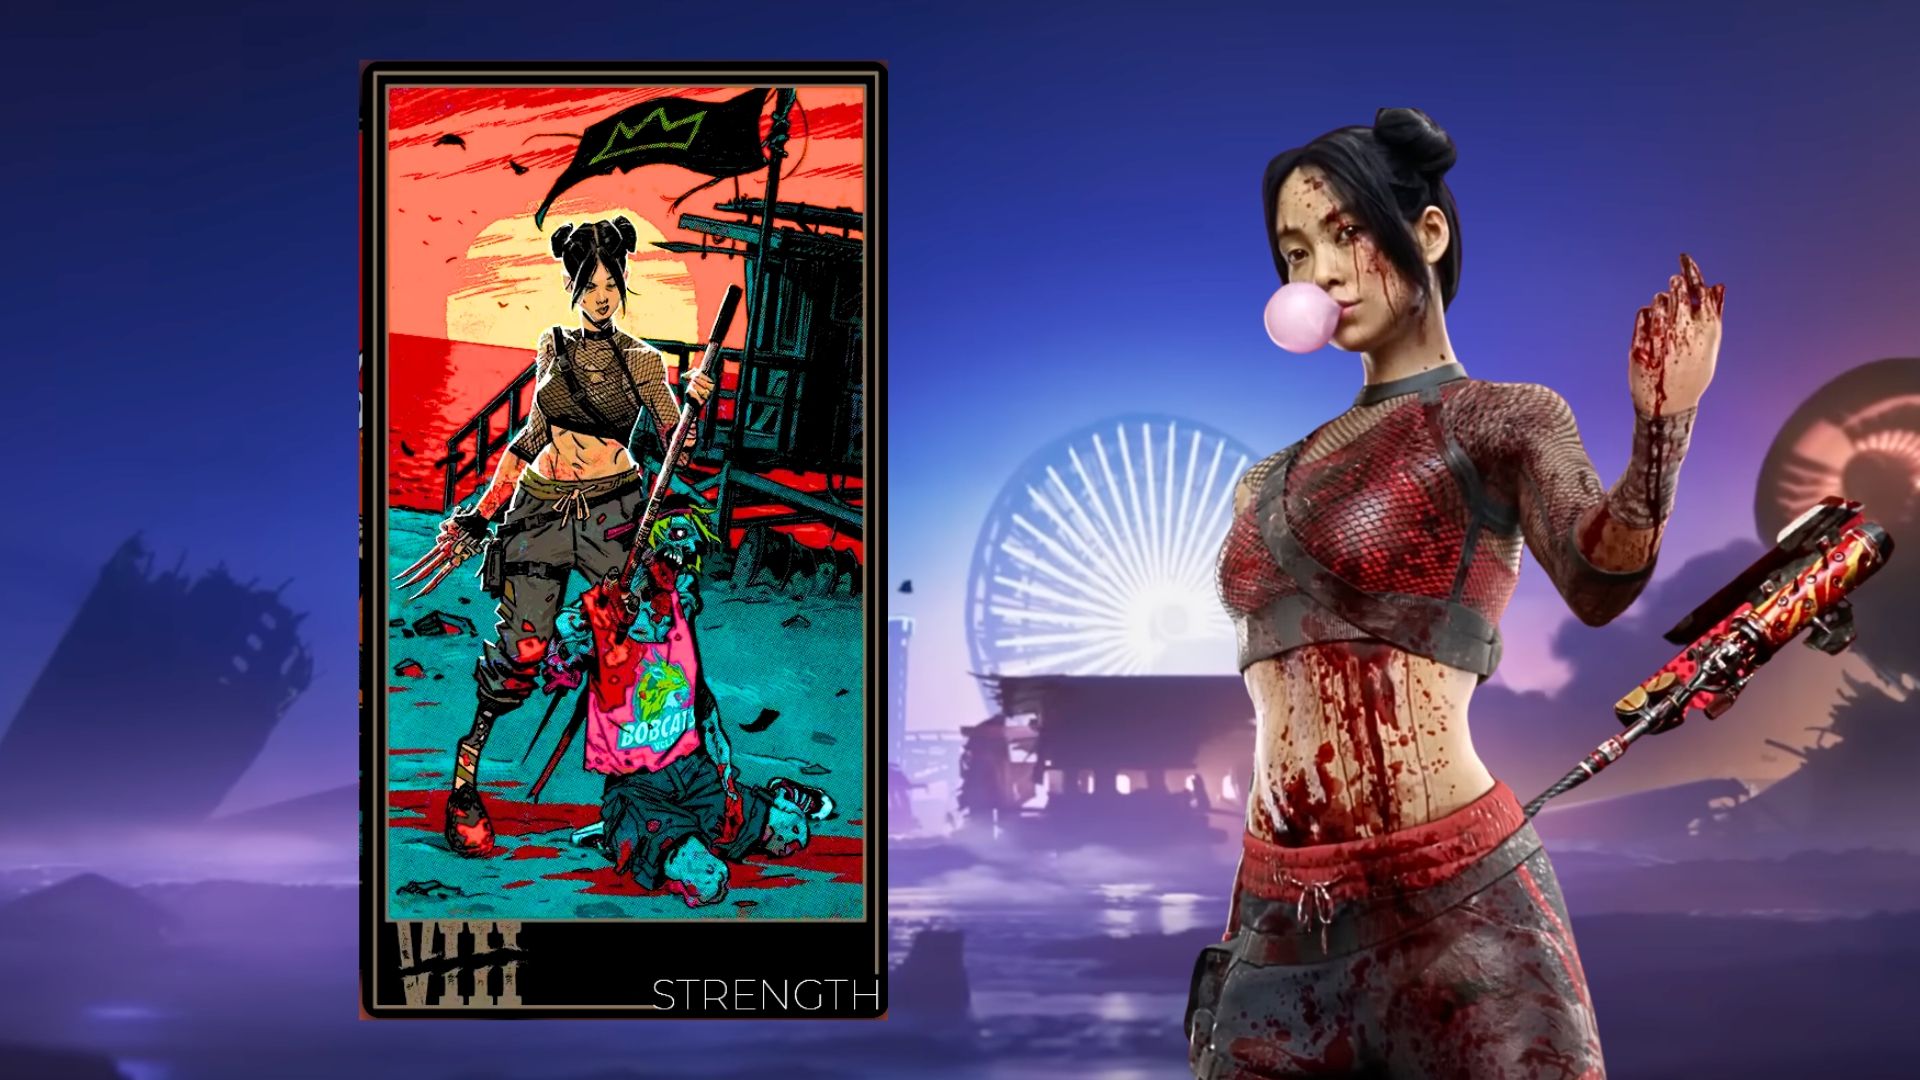 Amy Character Image and Card from Dead Island 2